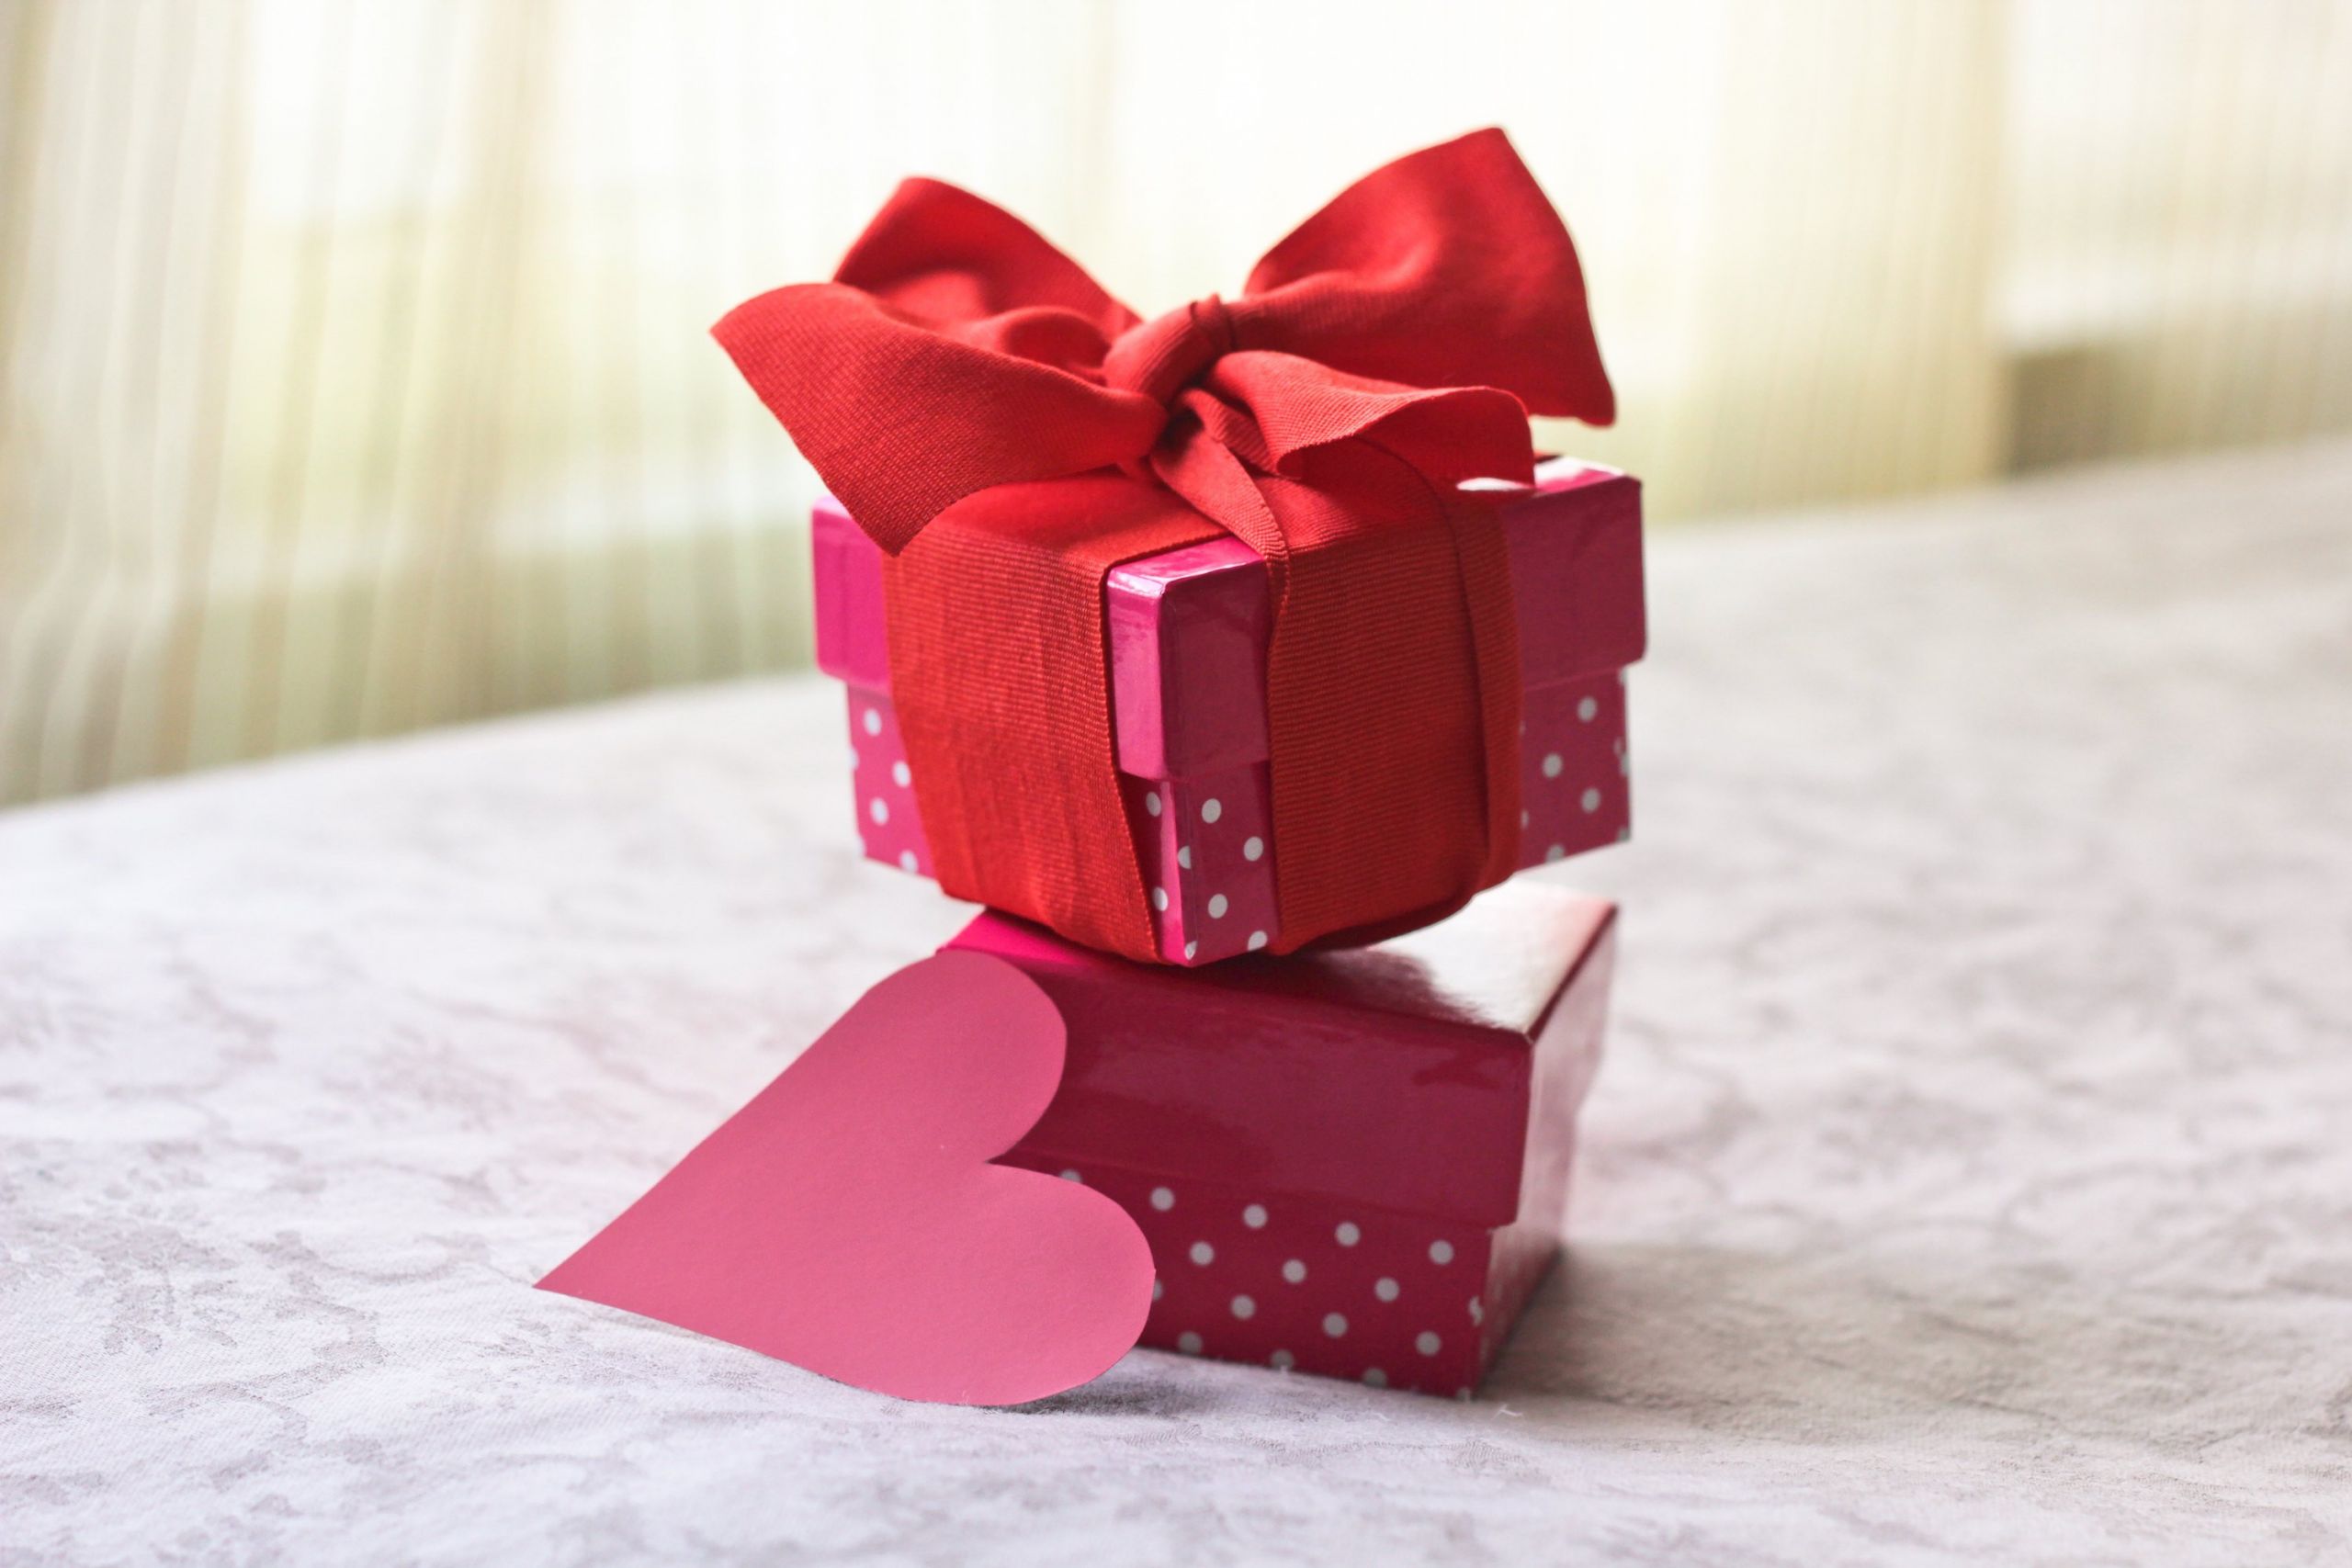 Homemade Birthday Gifts For Him
 Romantic Homemade Gifts for a Boyfriend on His Birthday